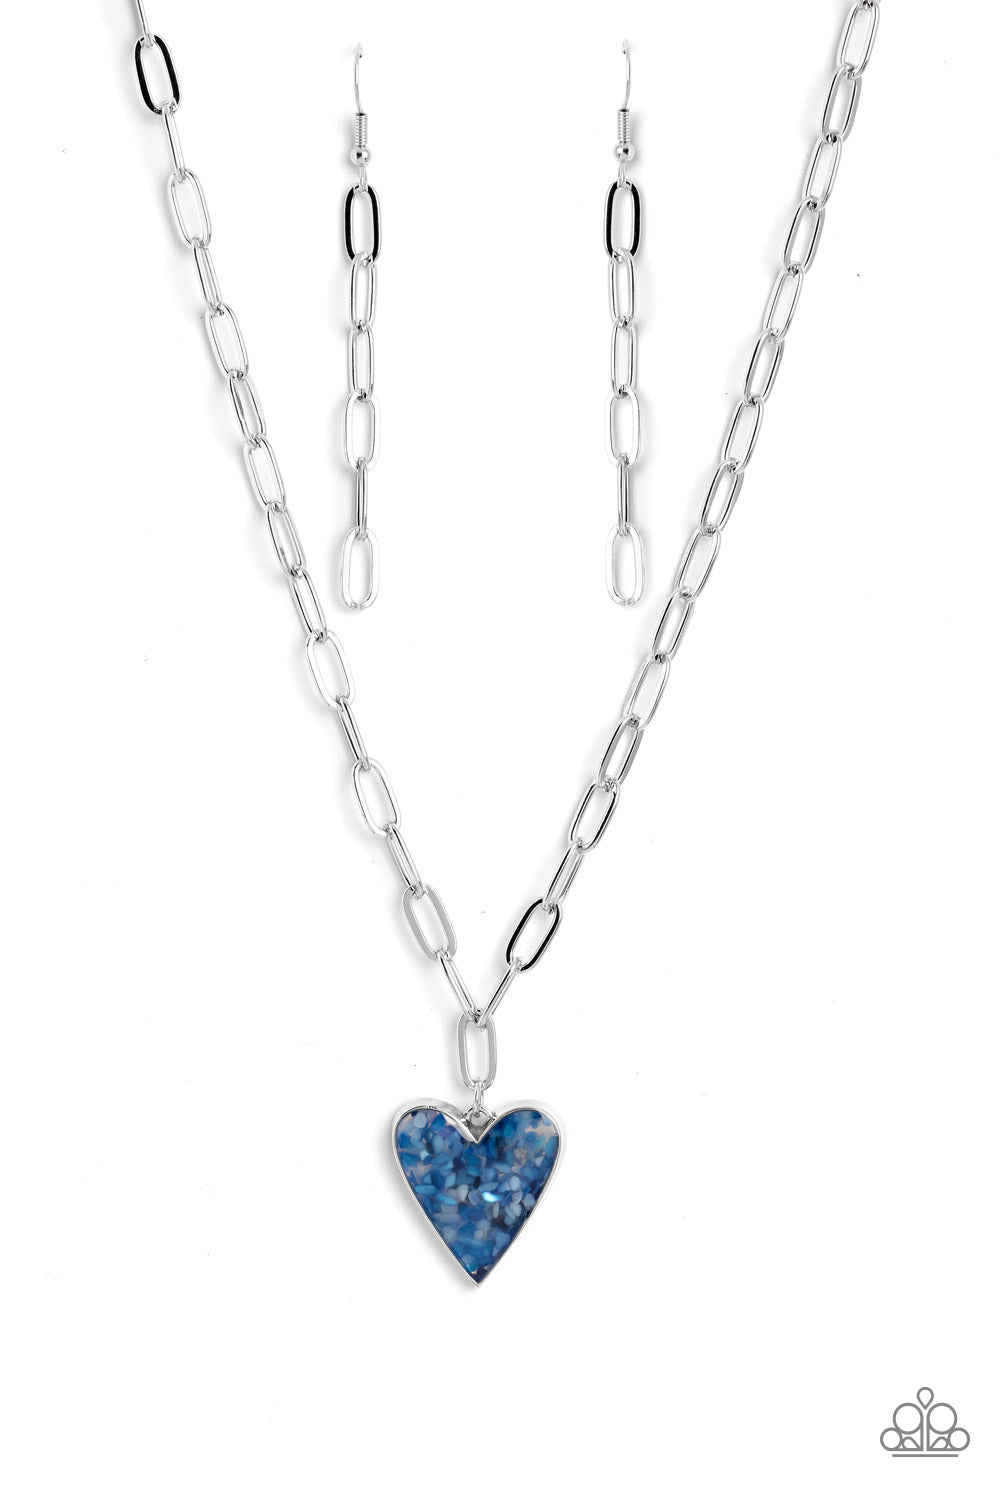 Paparazzi Kiss and SHELL Heart Necklaces